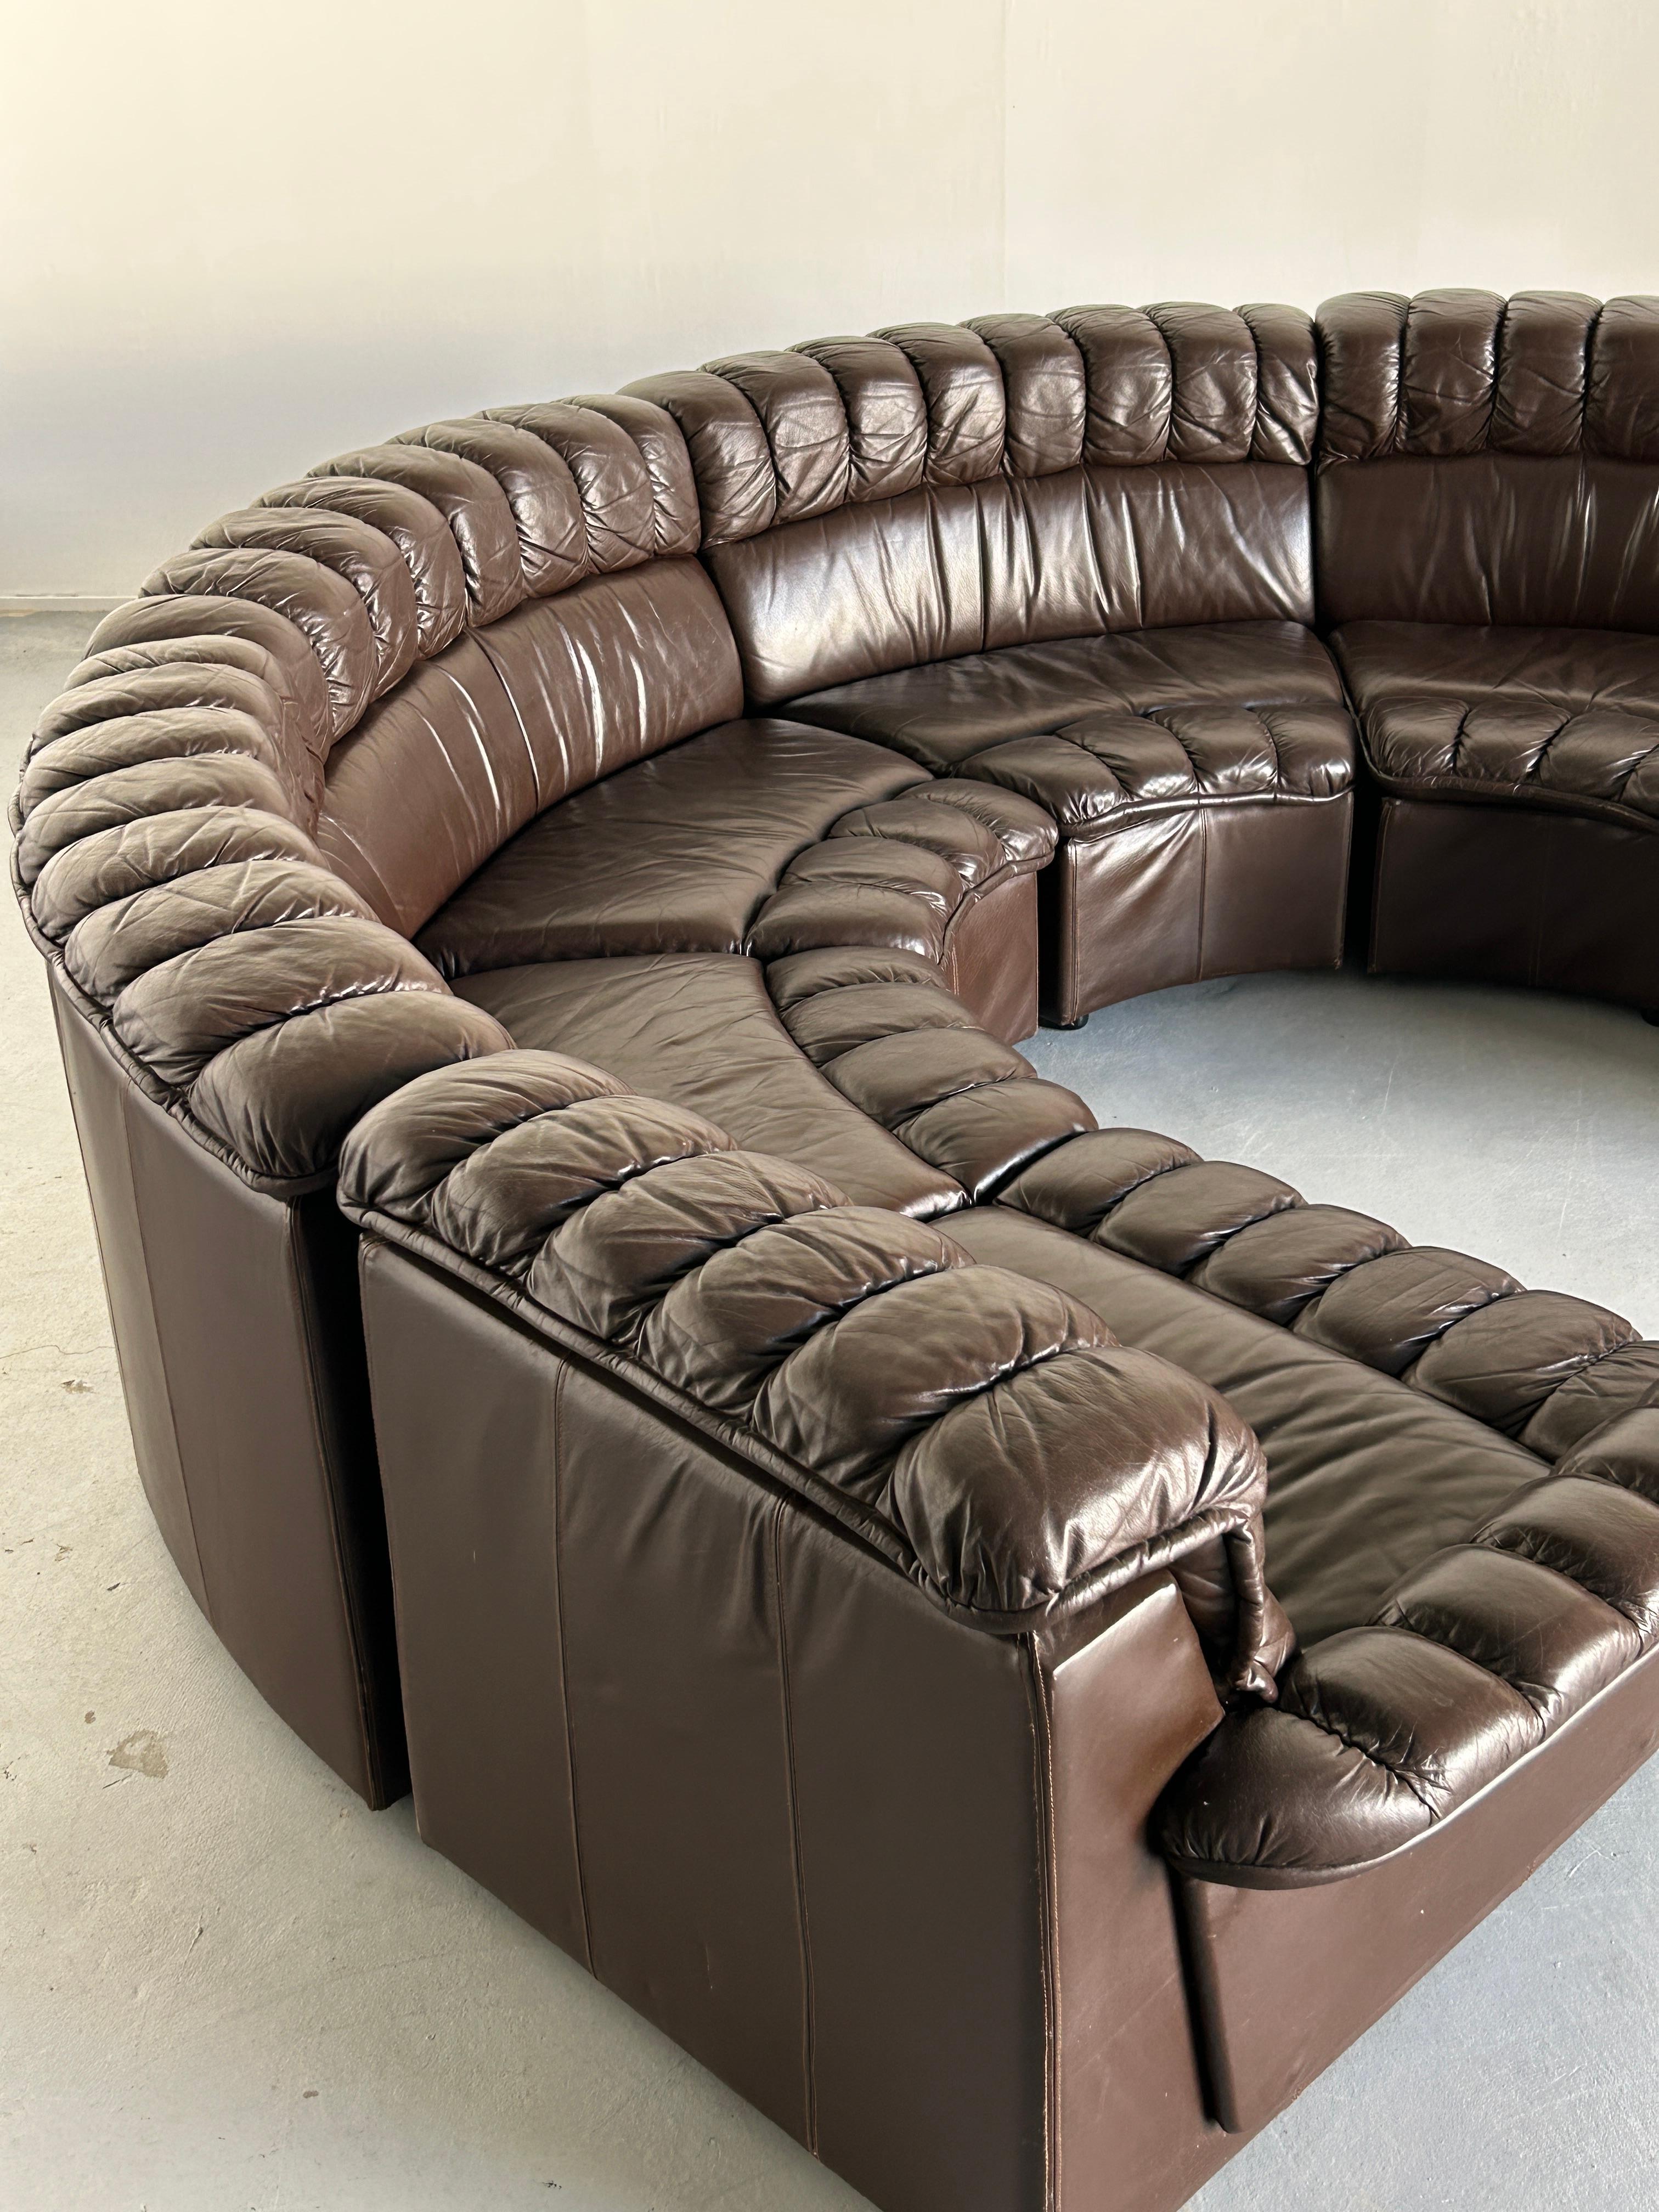 Mid-Century-Modern Leather Snake Sofa in style of De Sede DS-600 Non-Stop, 1970s For Sale 7